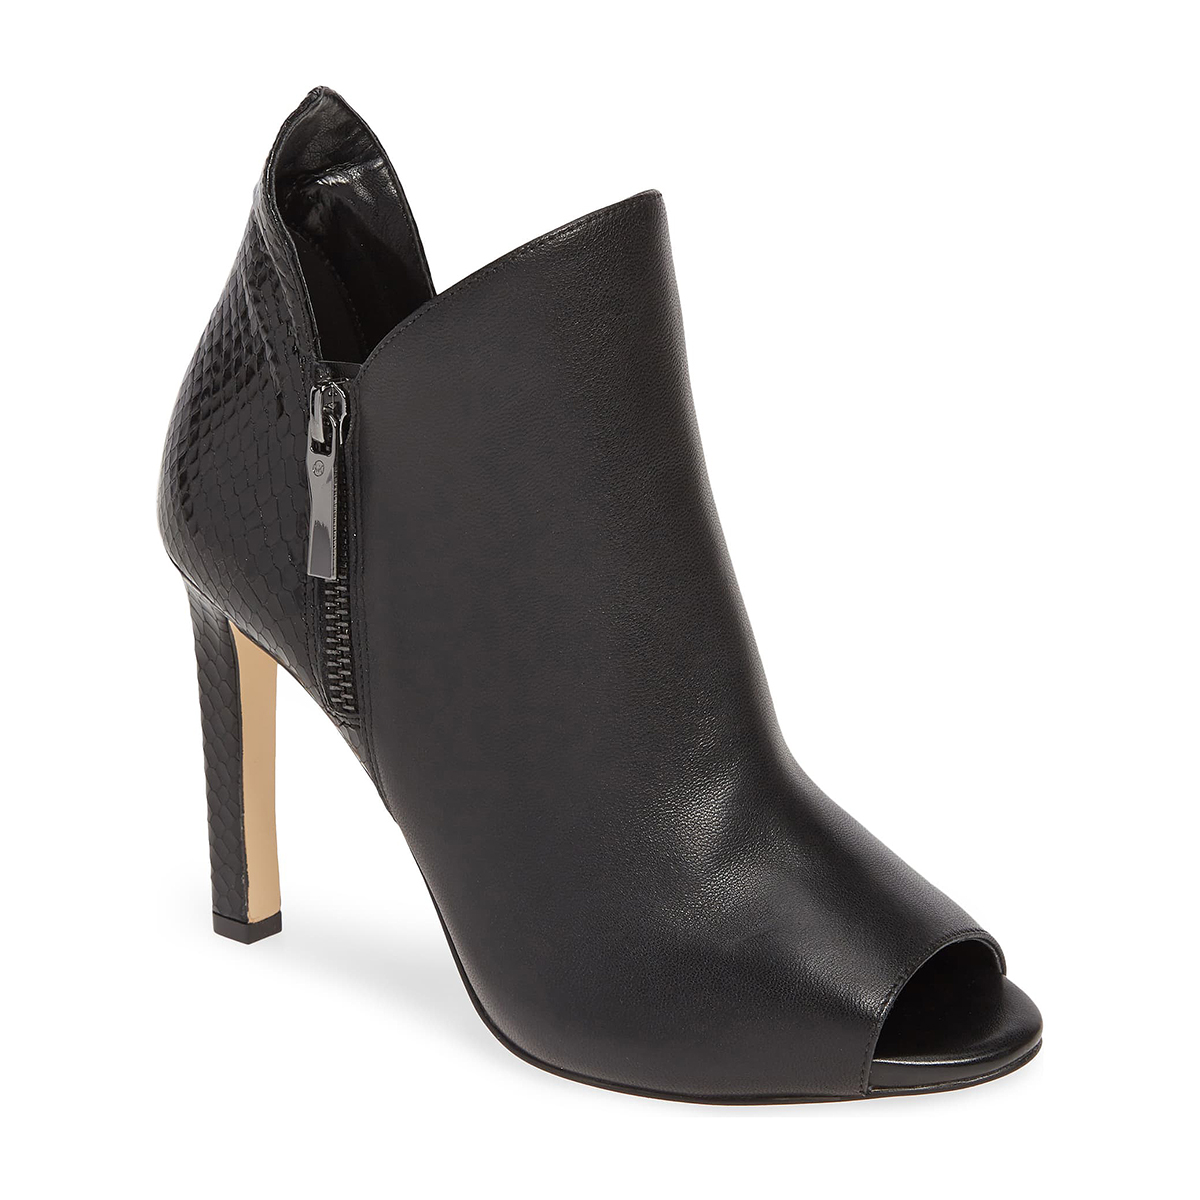 The Best Black Friday Deal on These Chic Michael Kors Leather Booties ...